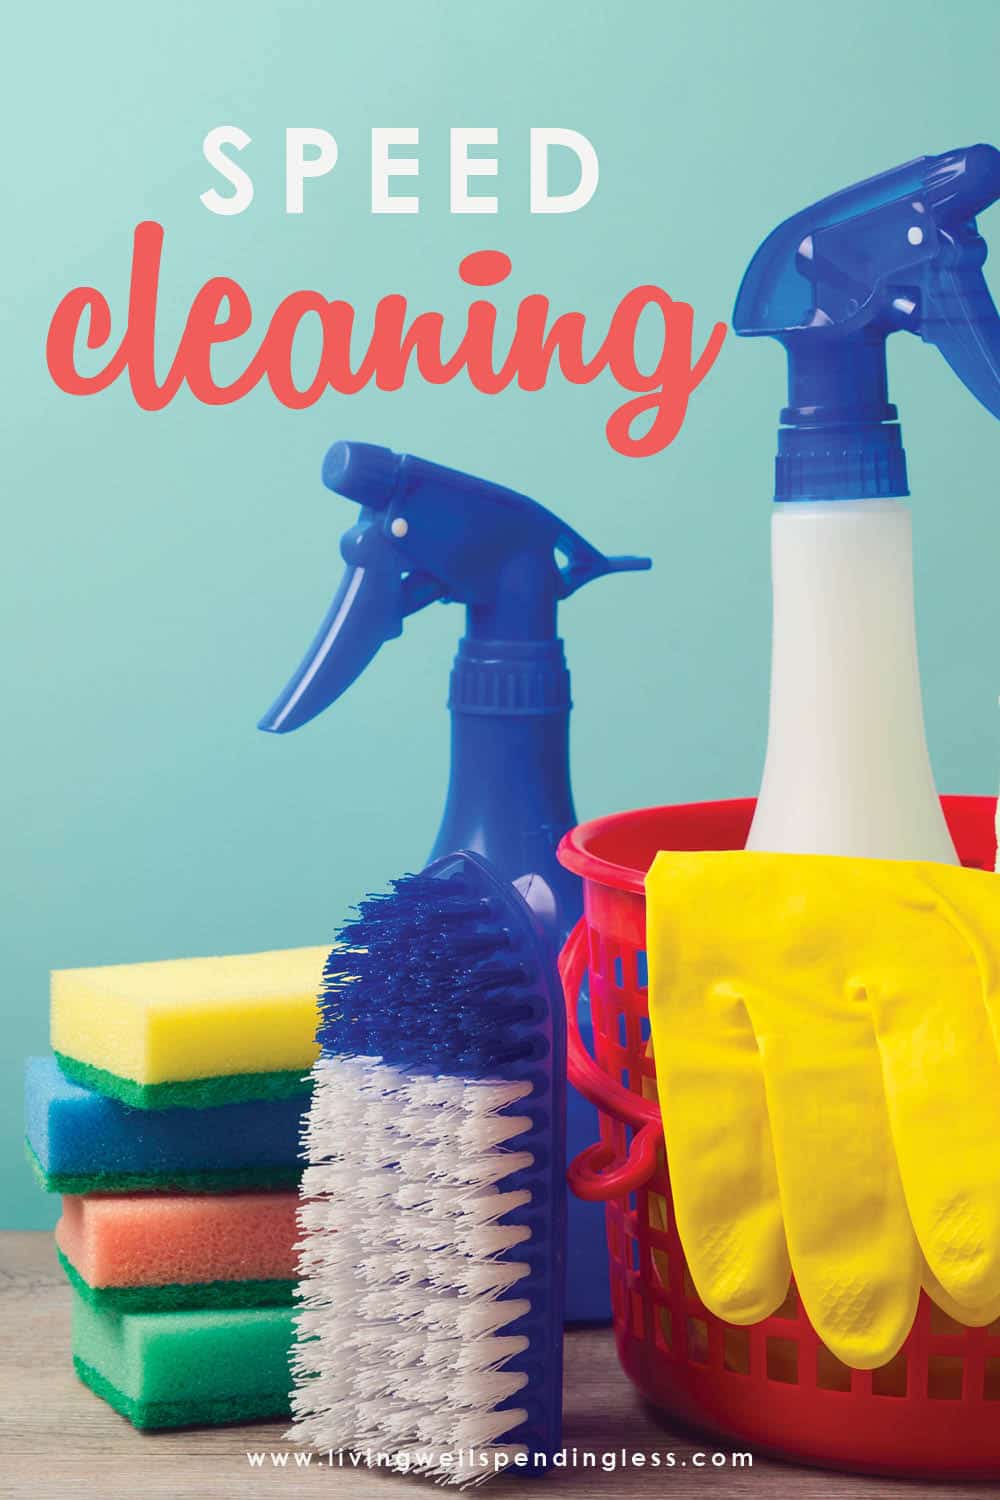 Want to achieve a neat & tidy house in just minutes a day? Our speed cleaning routine & checklist will show you exactly how it's done, so that you can spend less time cleaning and more time doing everything else you want to do! Genius! #speedcleaning #cleaningtips #springcleaning #greenandthriftycleaningproducts